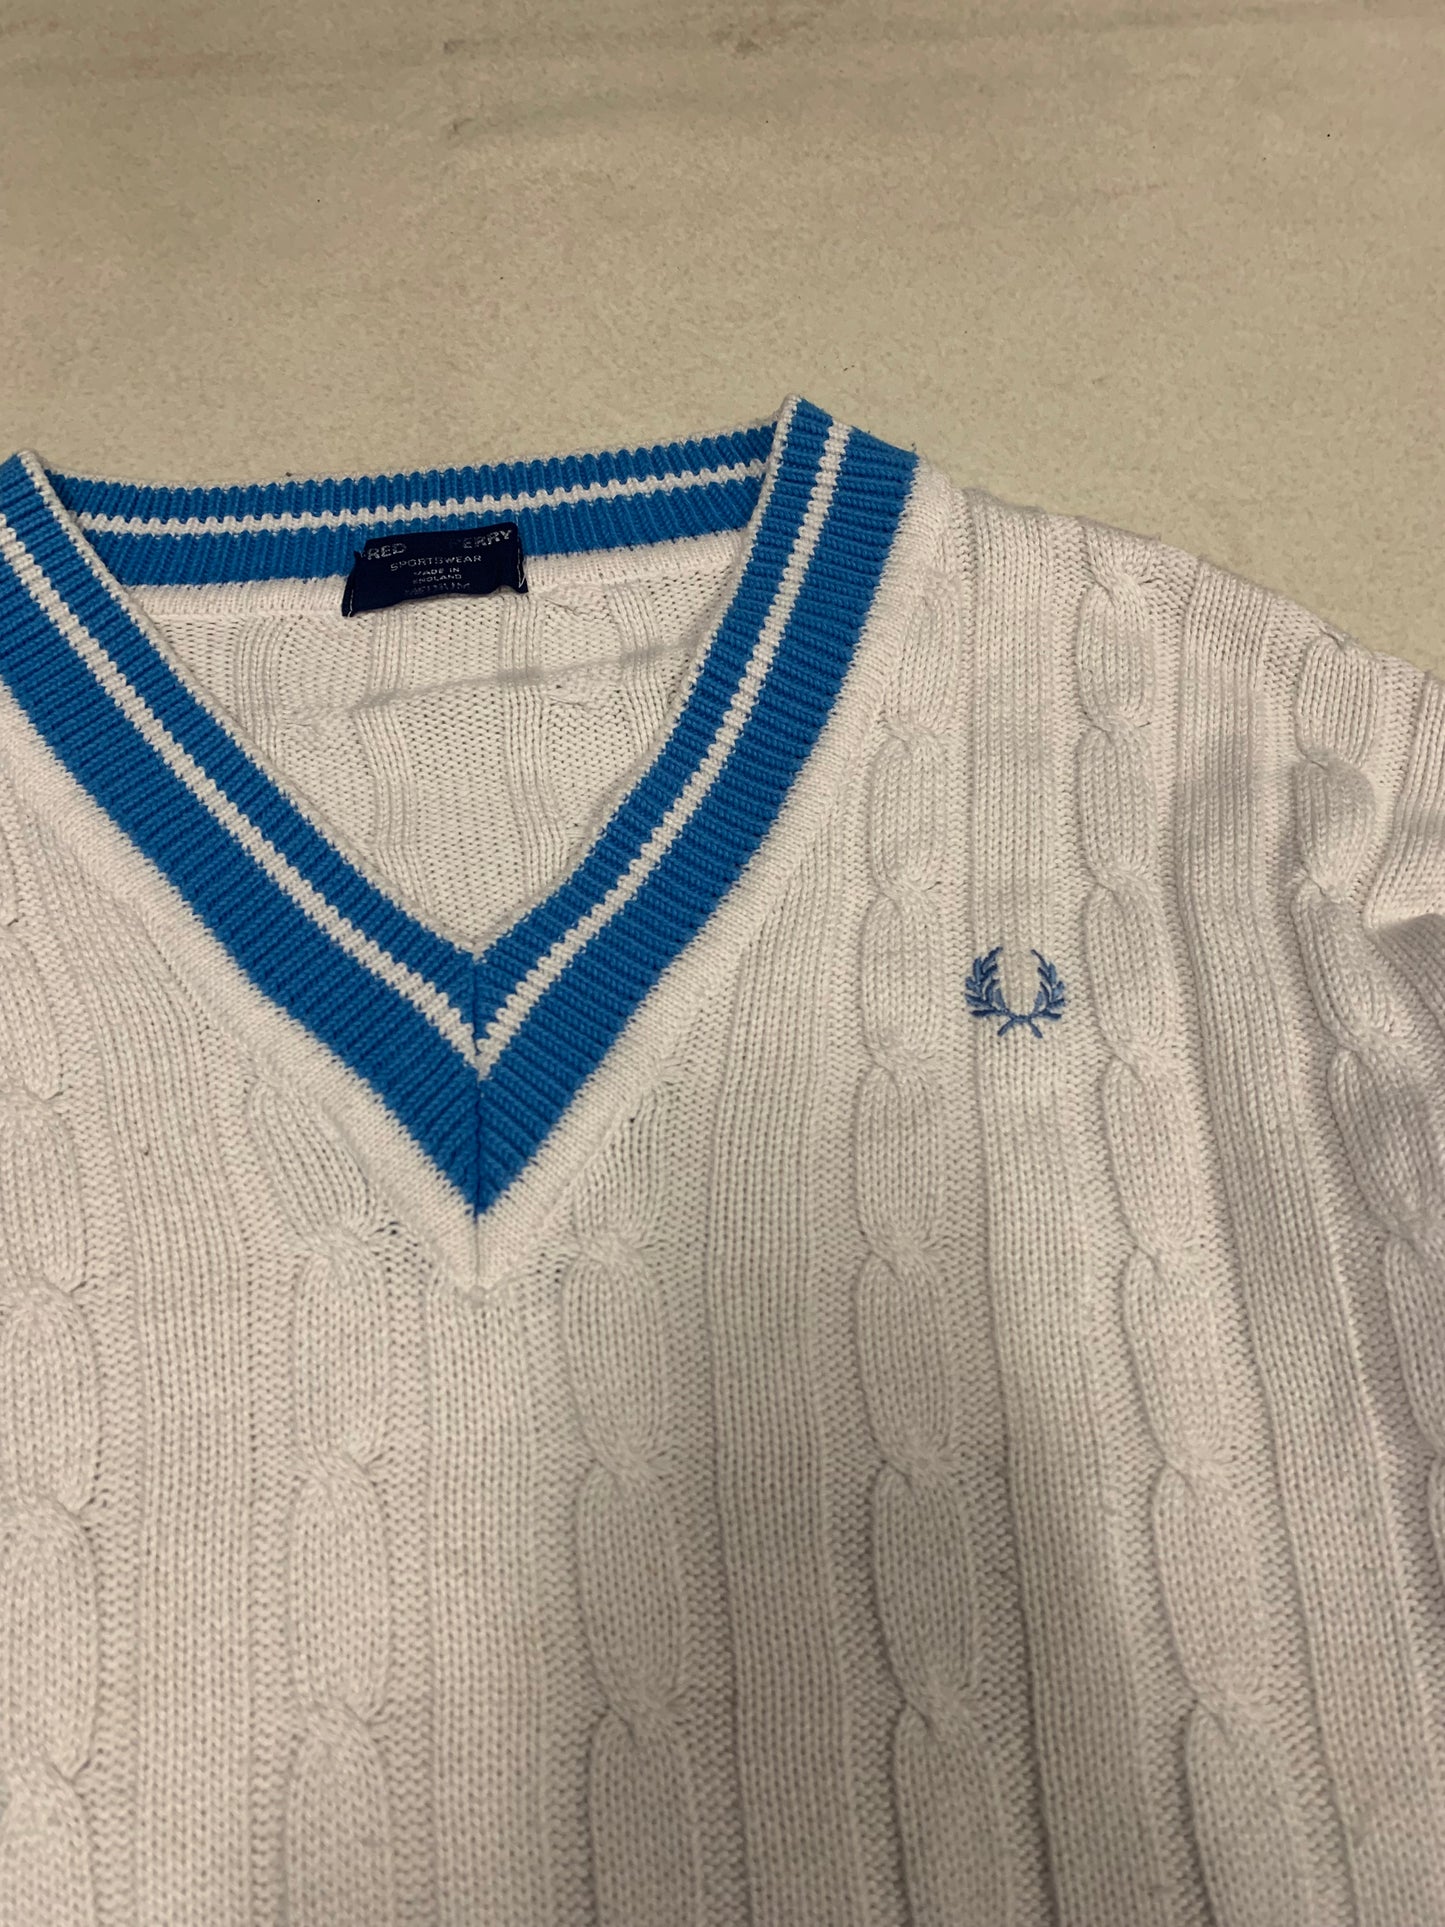 Jersey Vintage Fred Perry Made in England- M